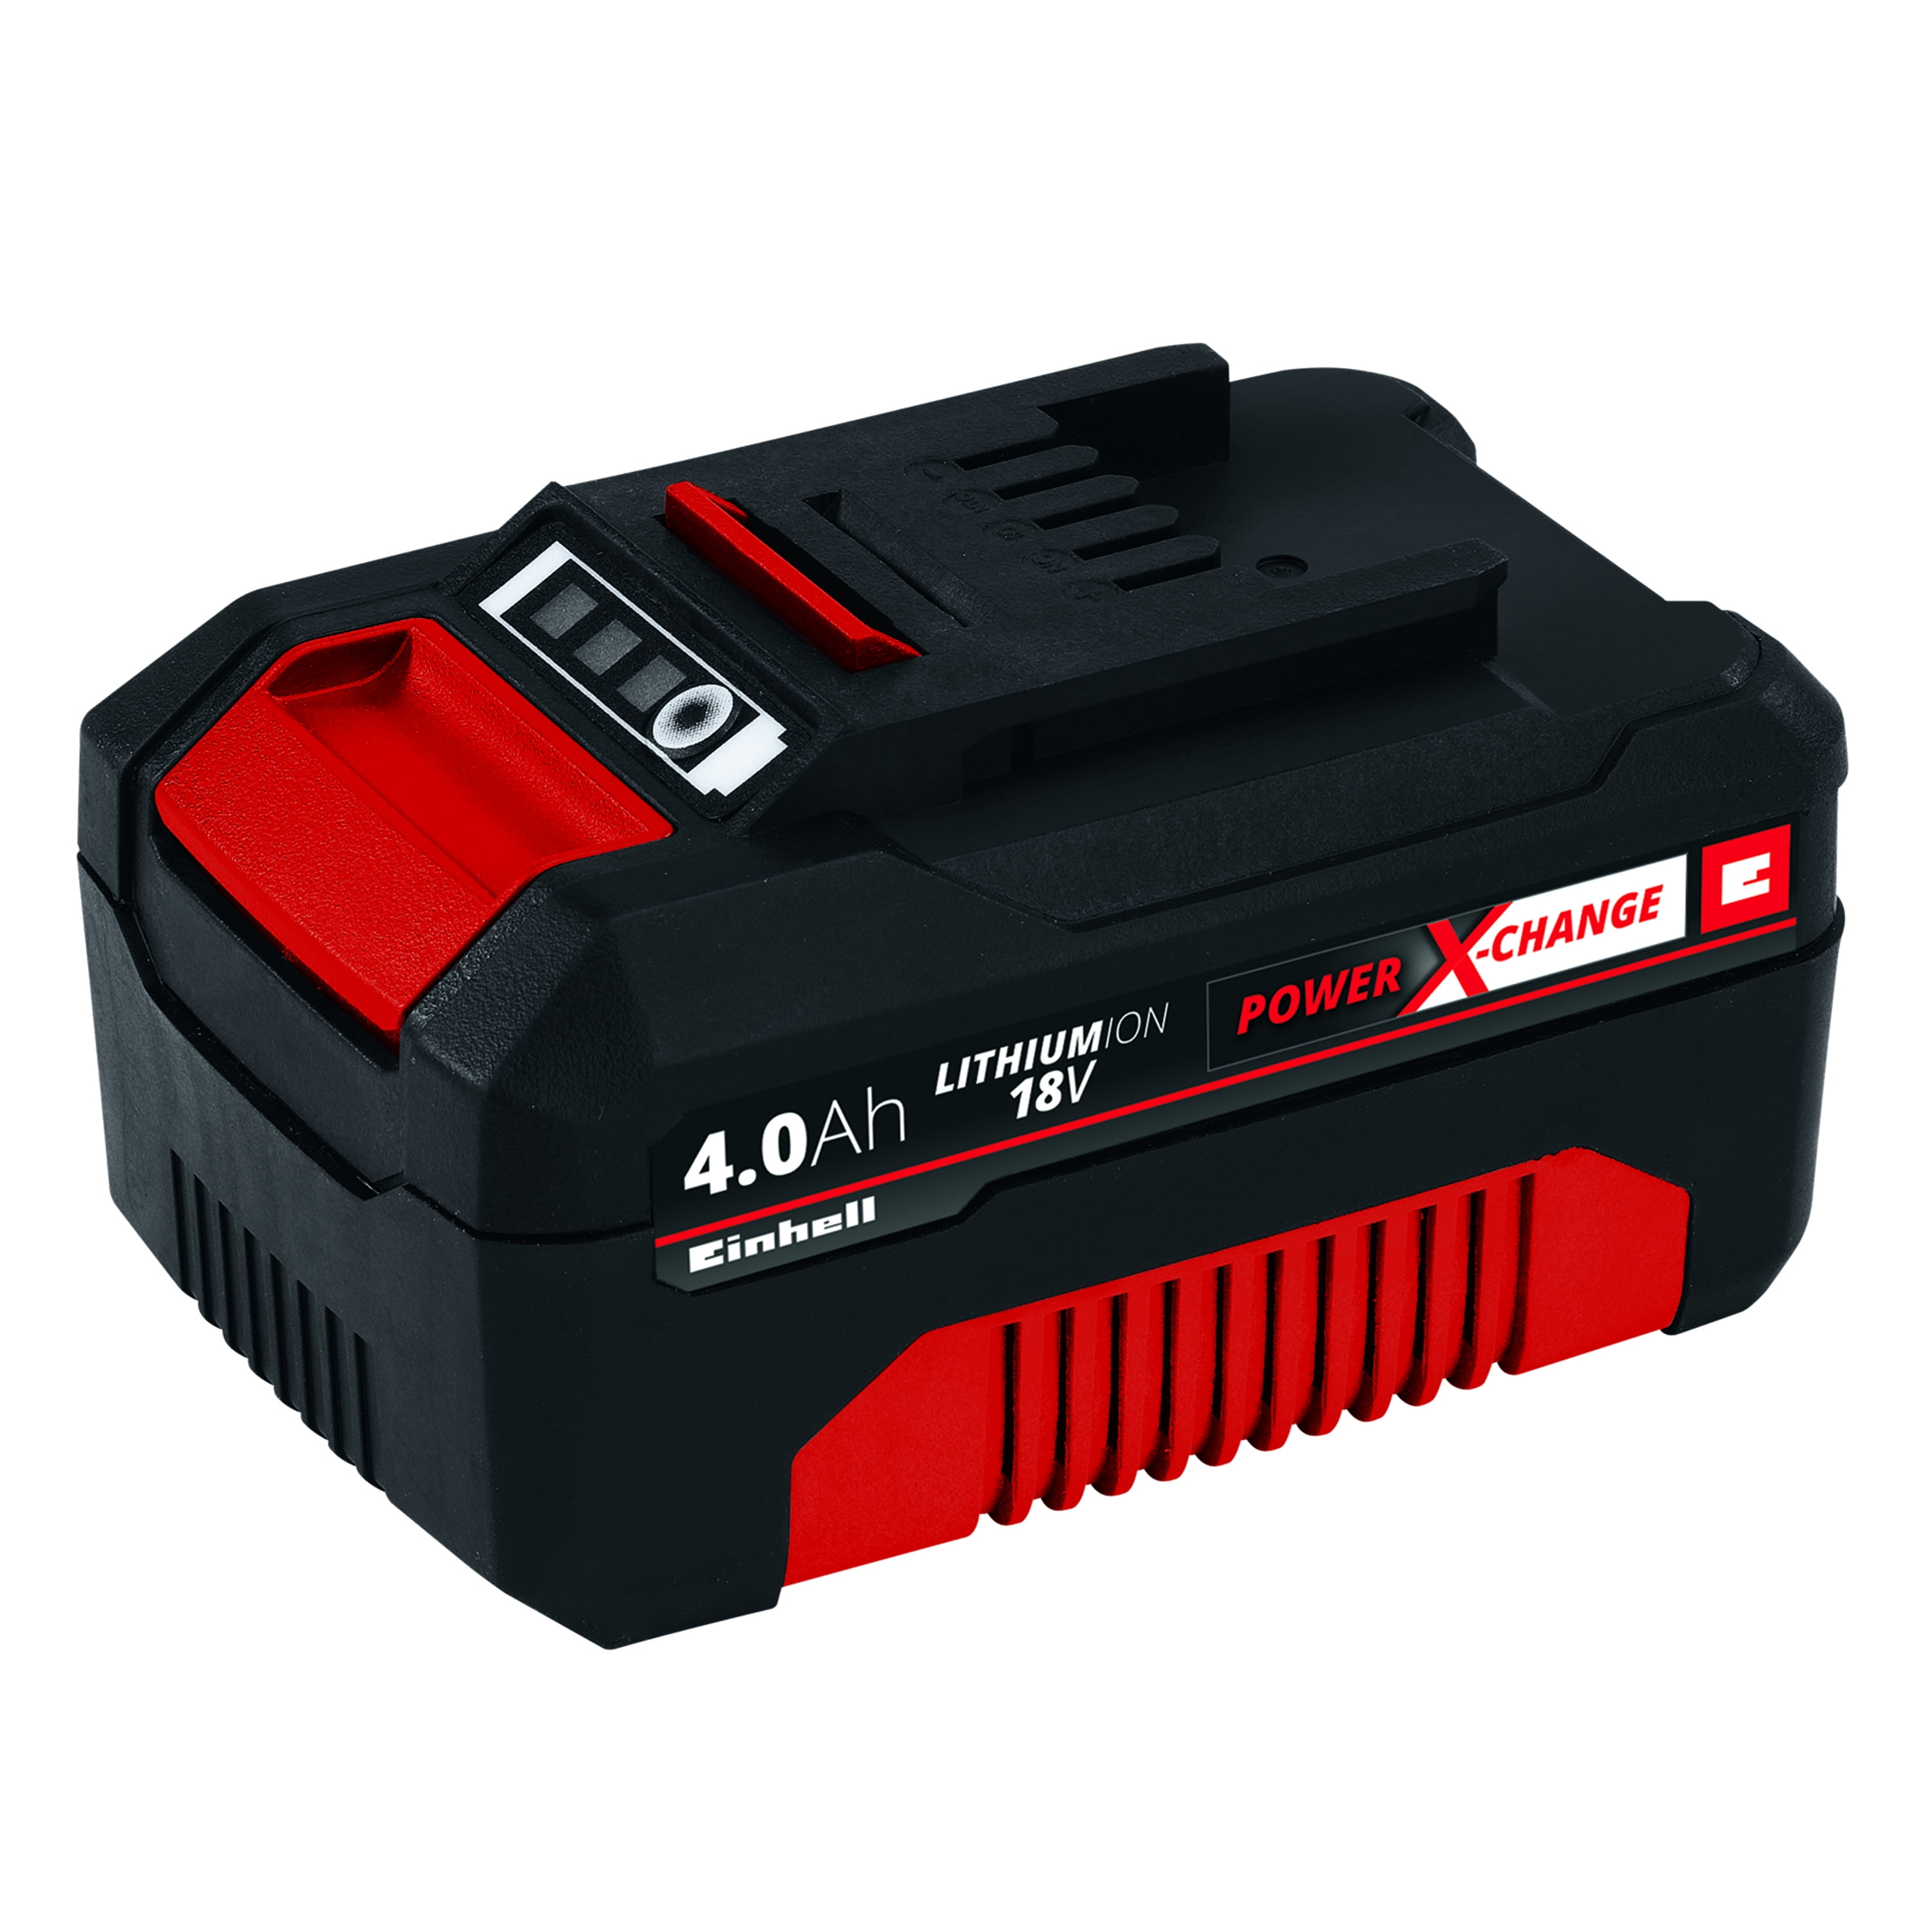 18V 5.5Ah Lithium Ion Battery For Einhell X-ChangeH Family Cordless Power Tools